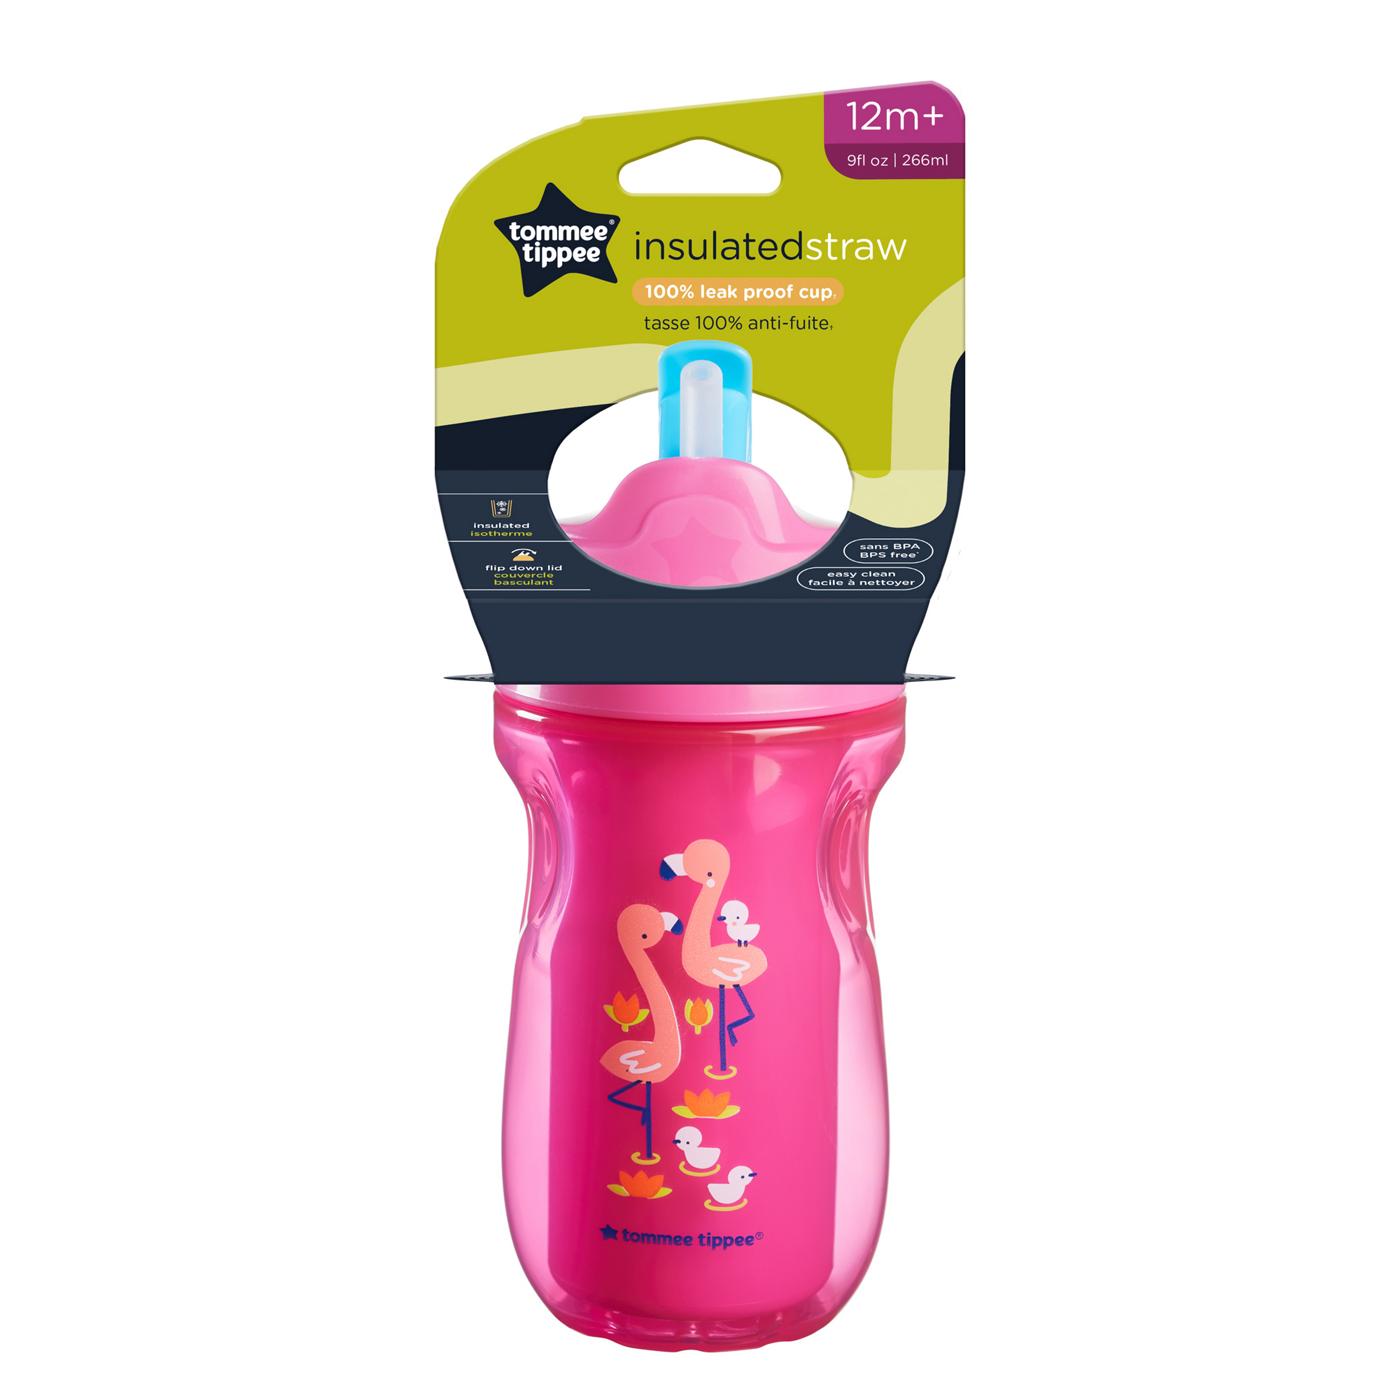 Tommee Tippee Insulated Straw Cup - Assorted Colors; image 3 of 4